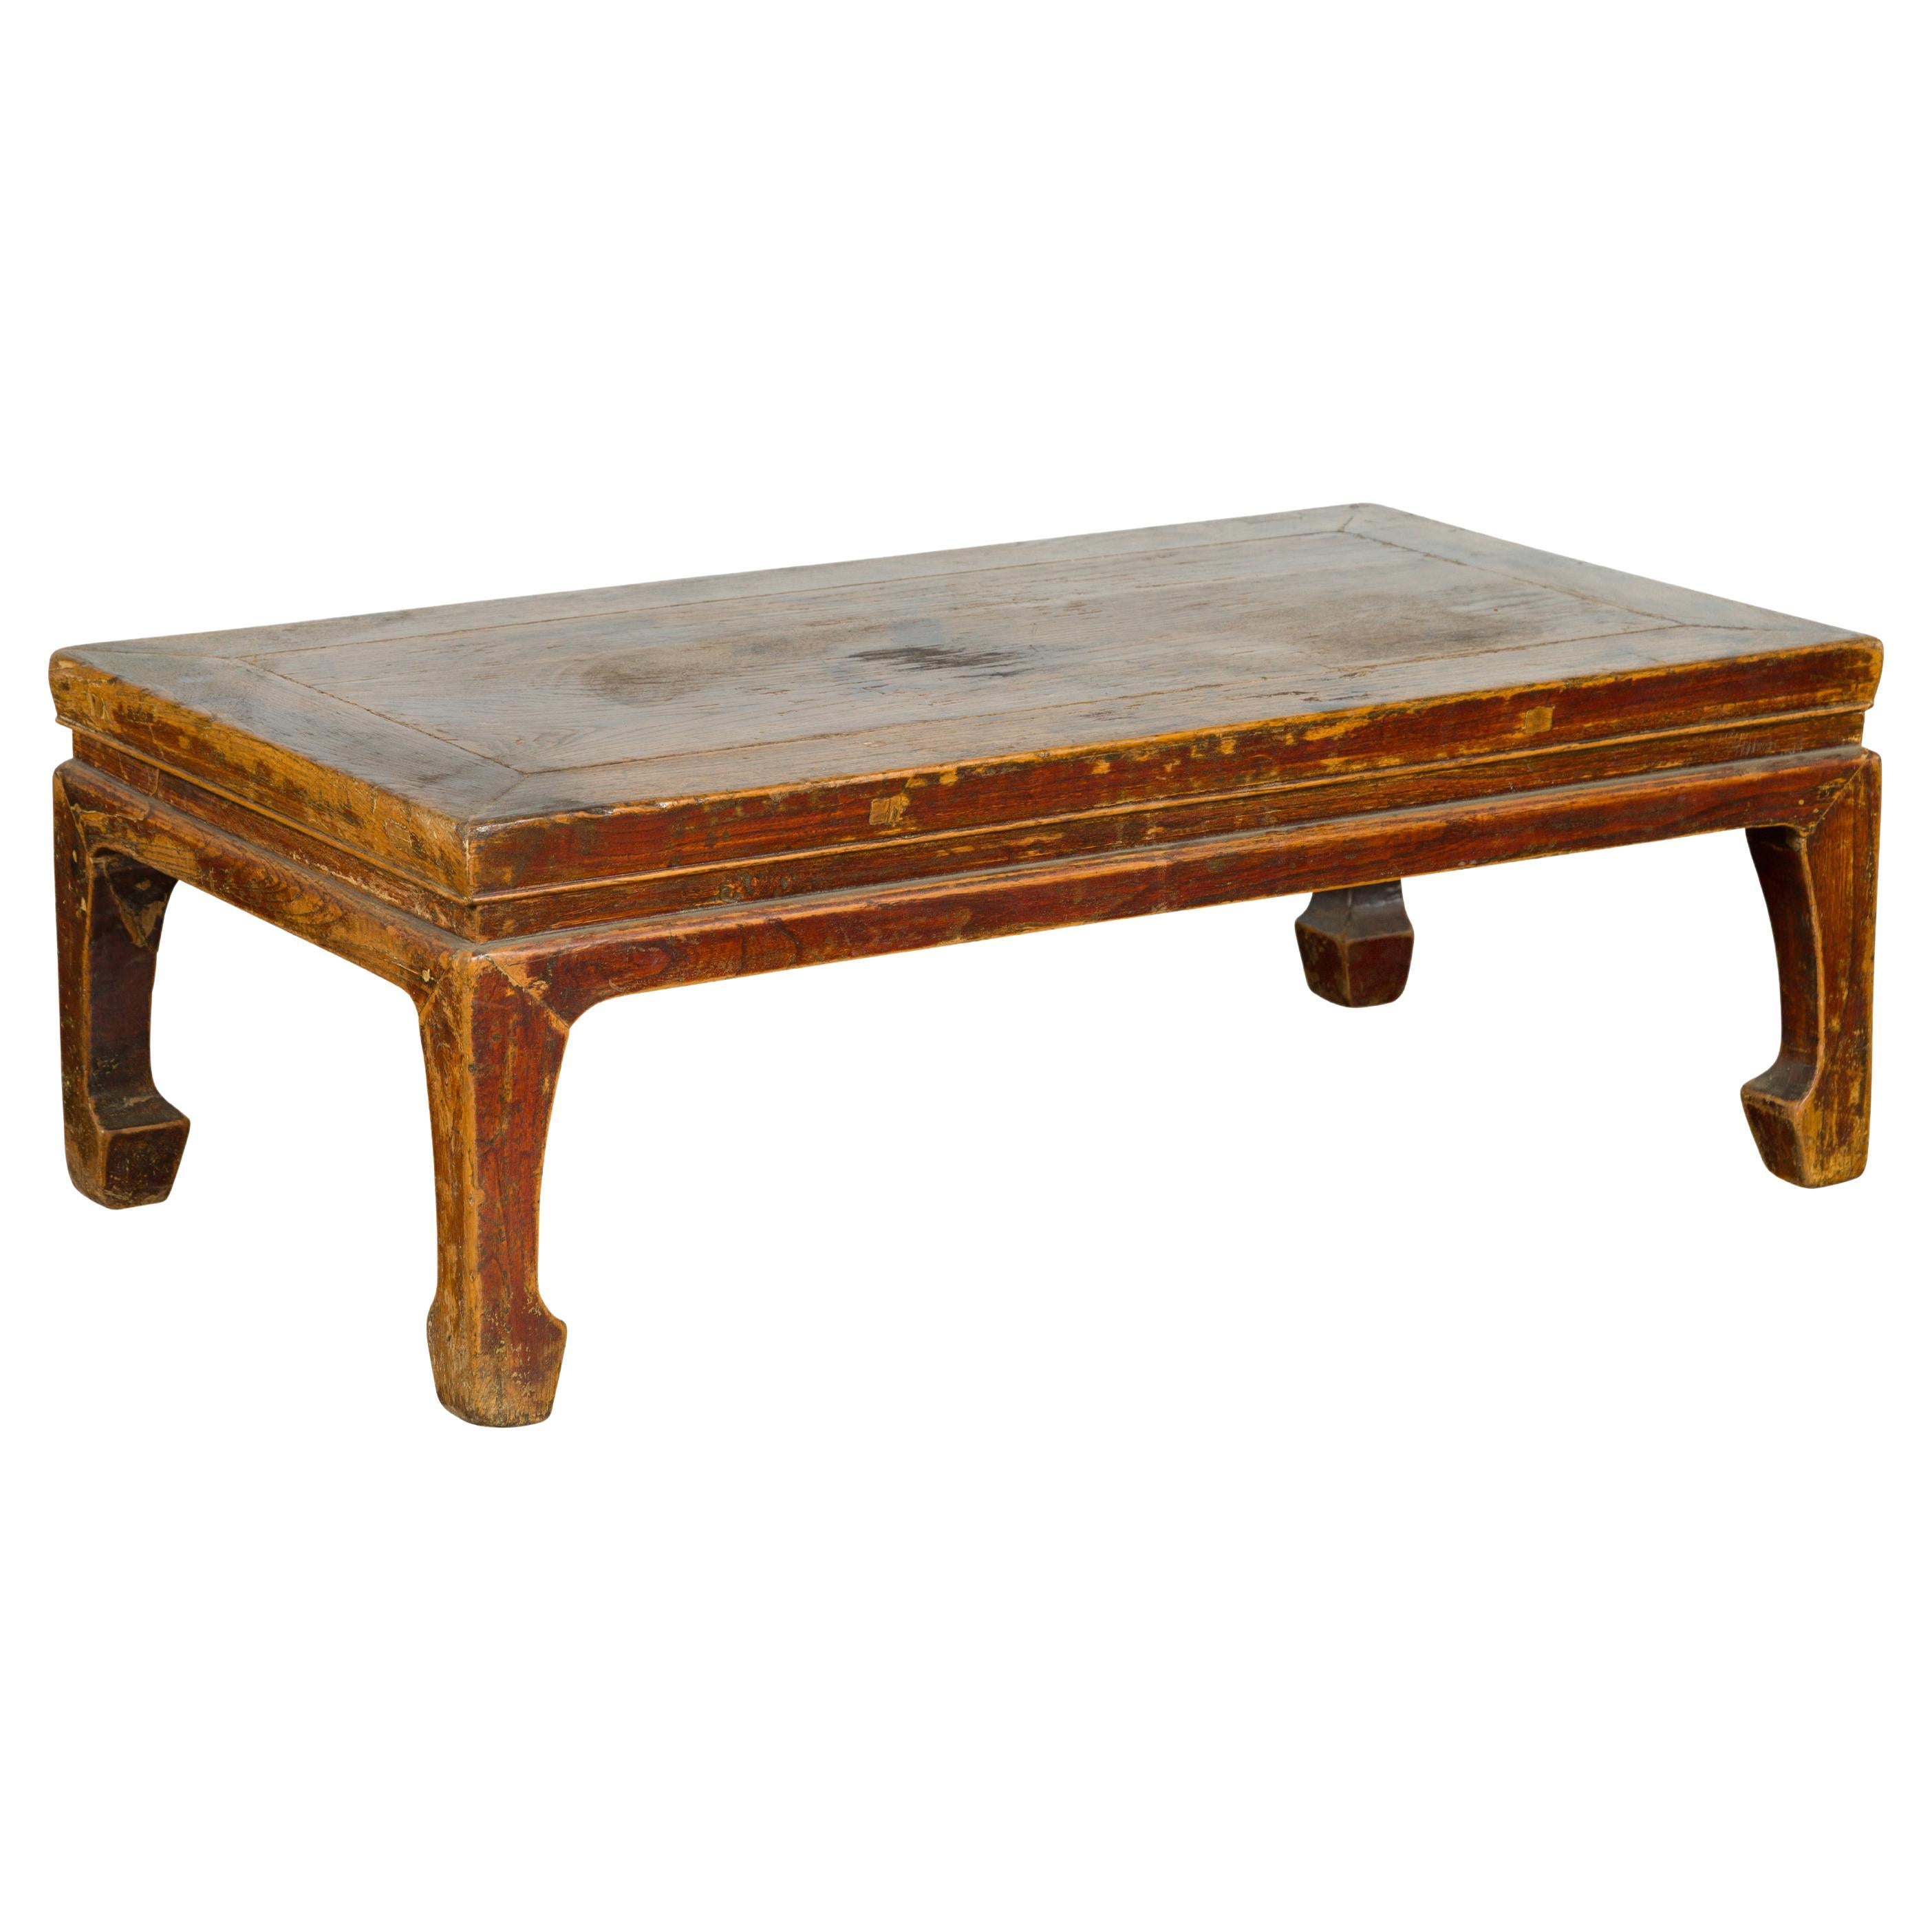 Chinese Qing Dynasty 19th Century Low Coffee Table with Distressed Patina